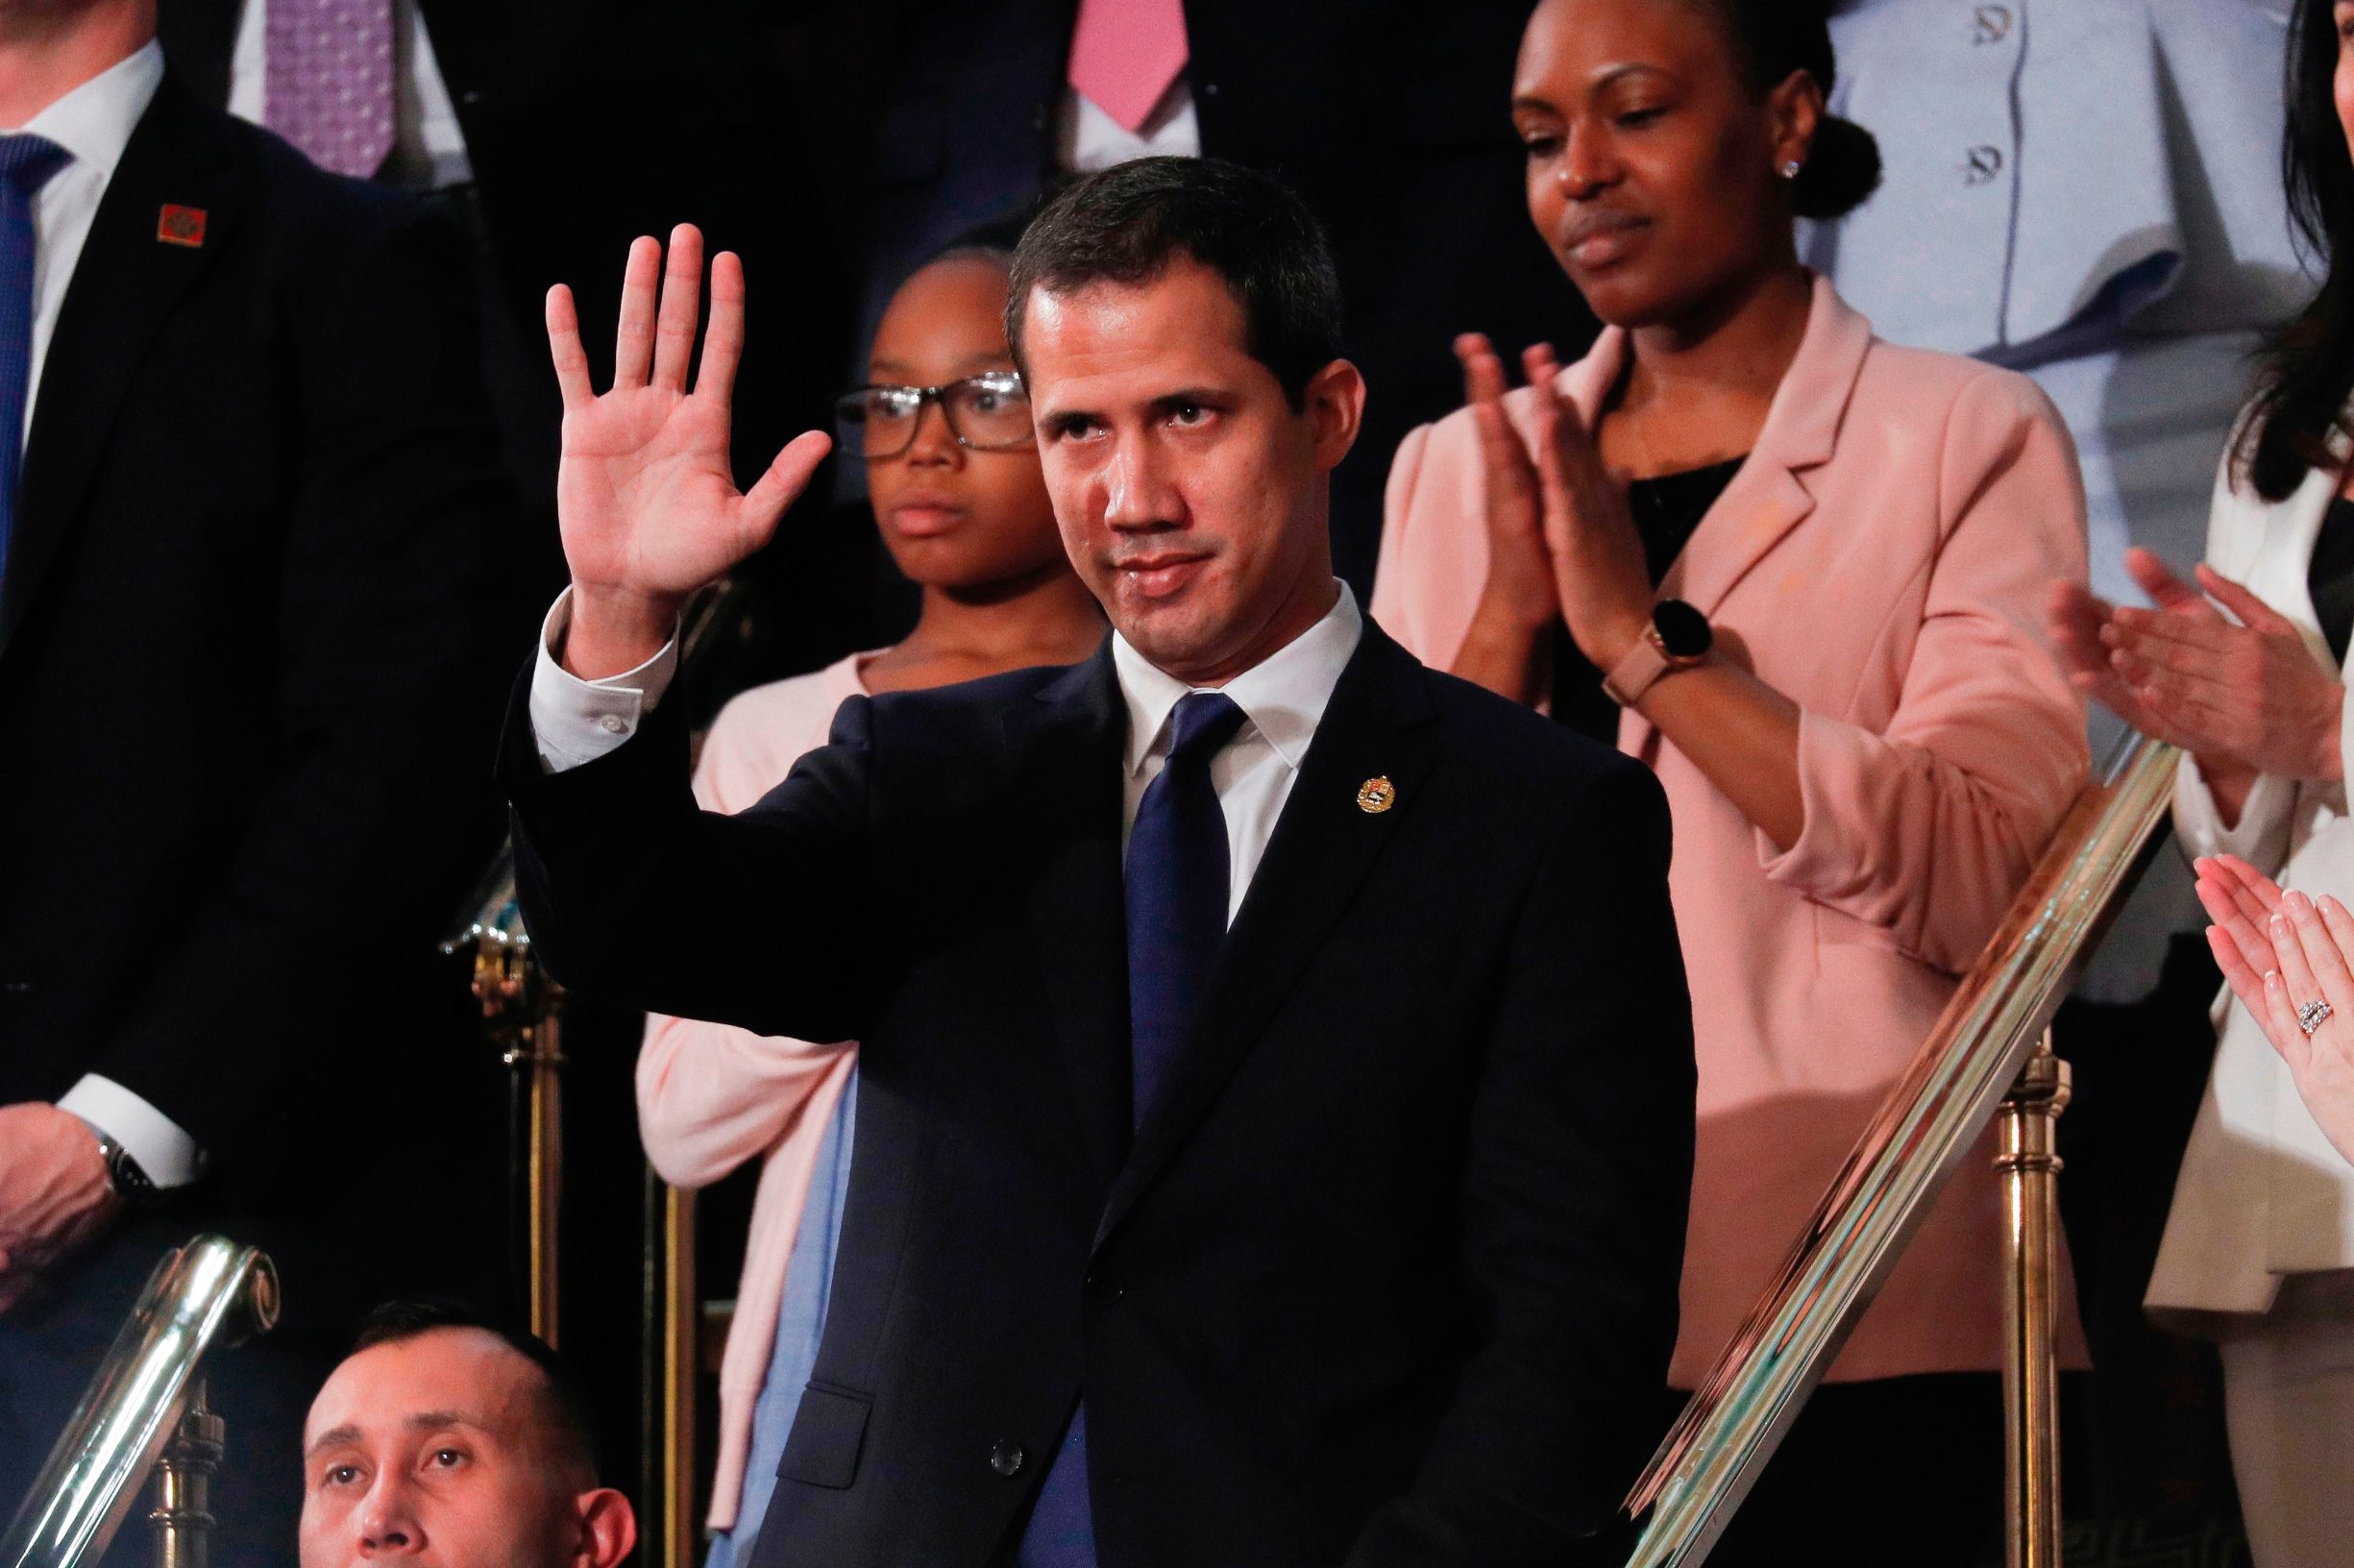 Venezuela's opposition leader Juan Guaido waves after being acknowledged by US President Donald Trump as he delivers the State of the Union address at the US Capitol in Washington, DC, on February 4, 2020. (Photo by LEAH MILLIS / POOL / AFP)